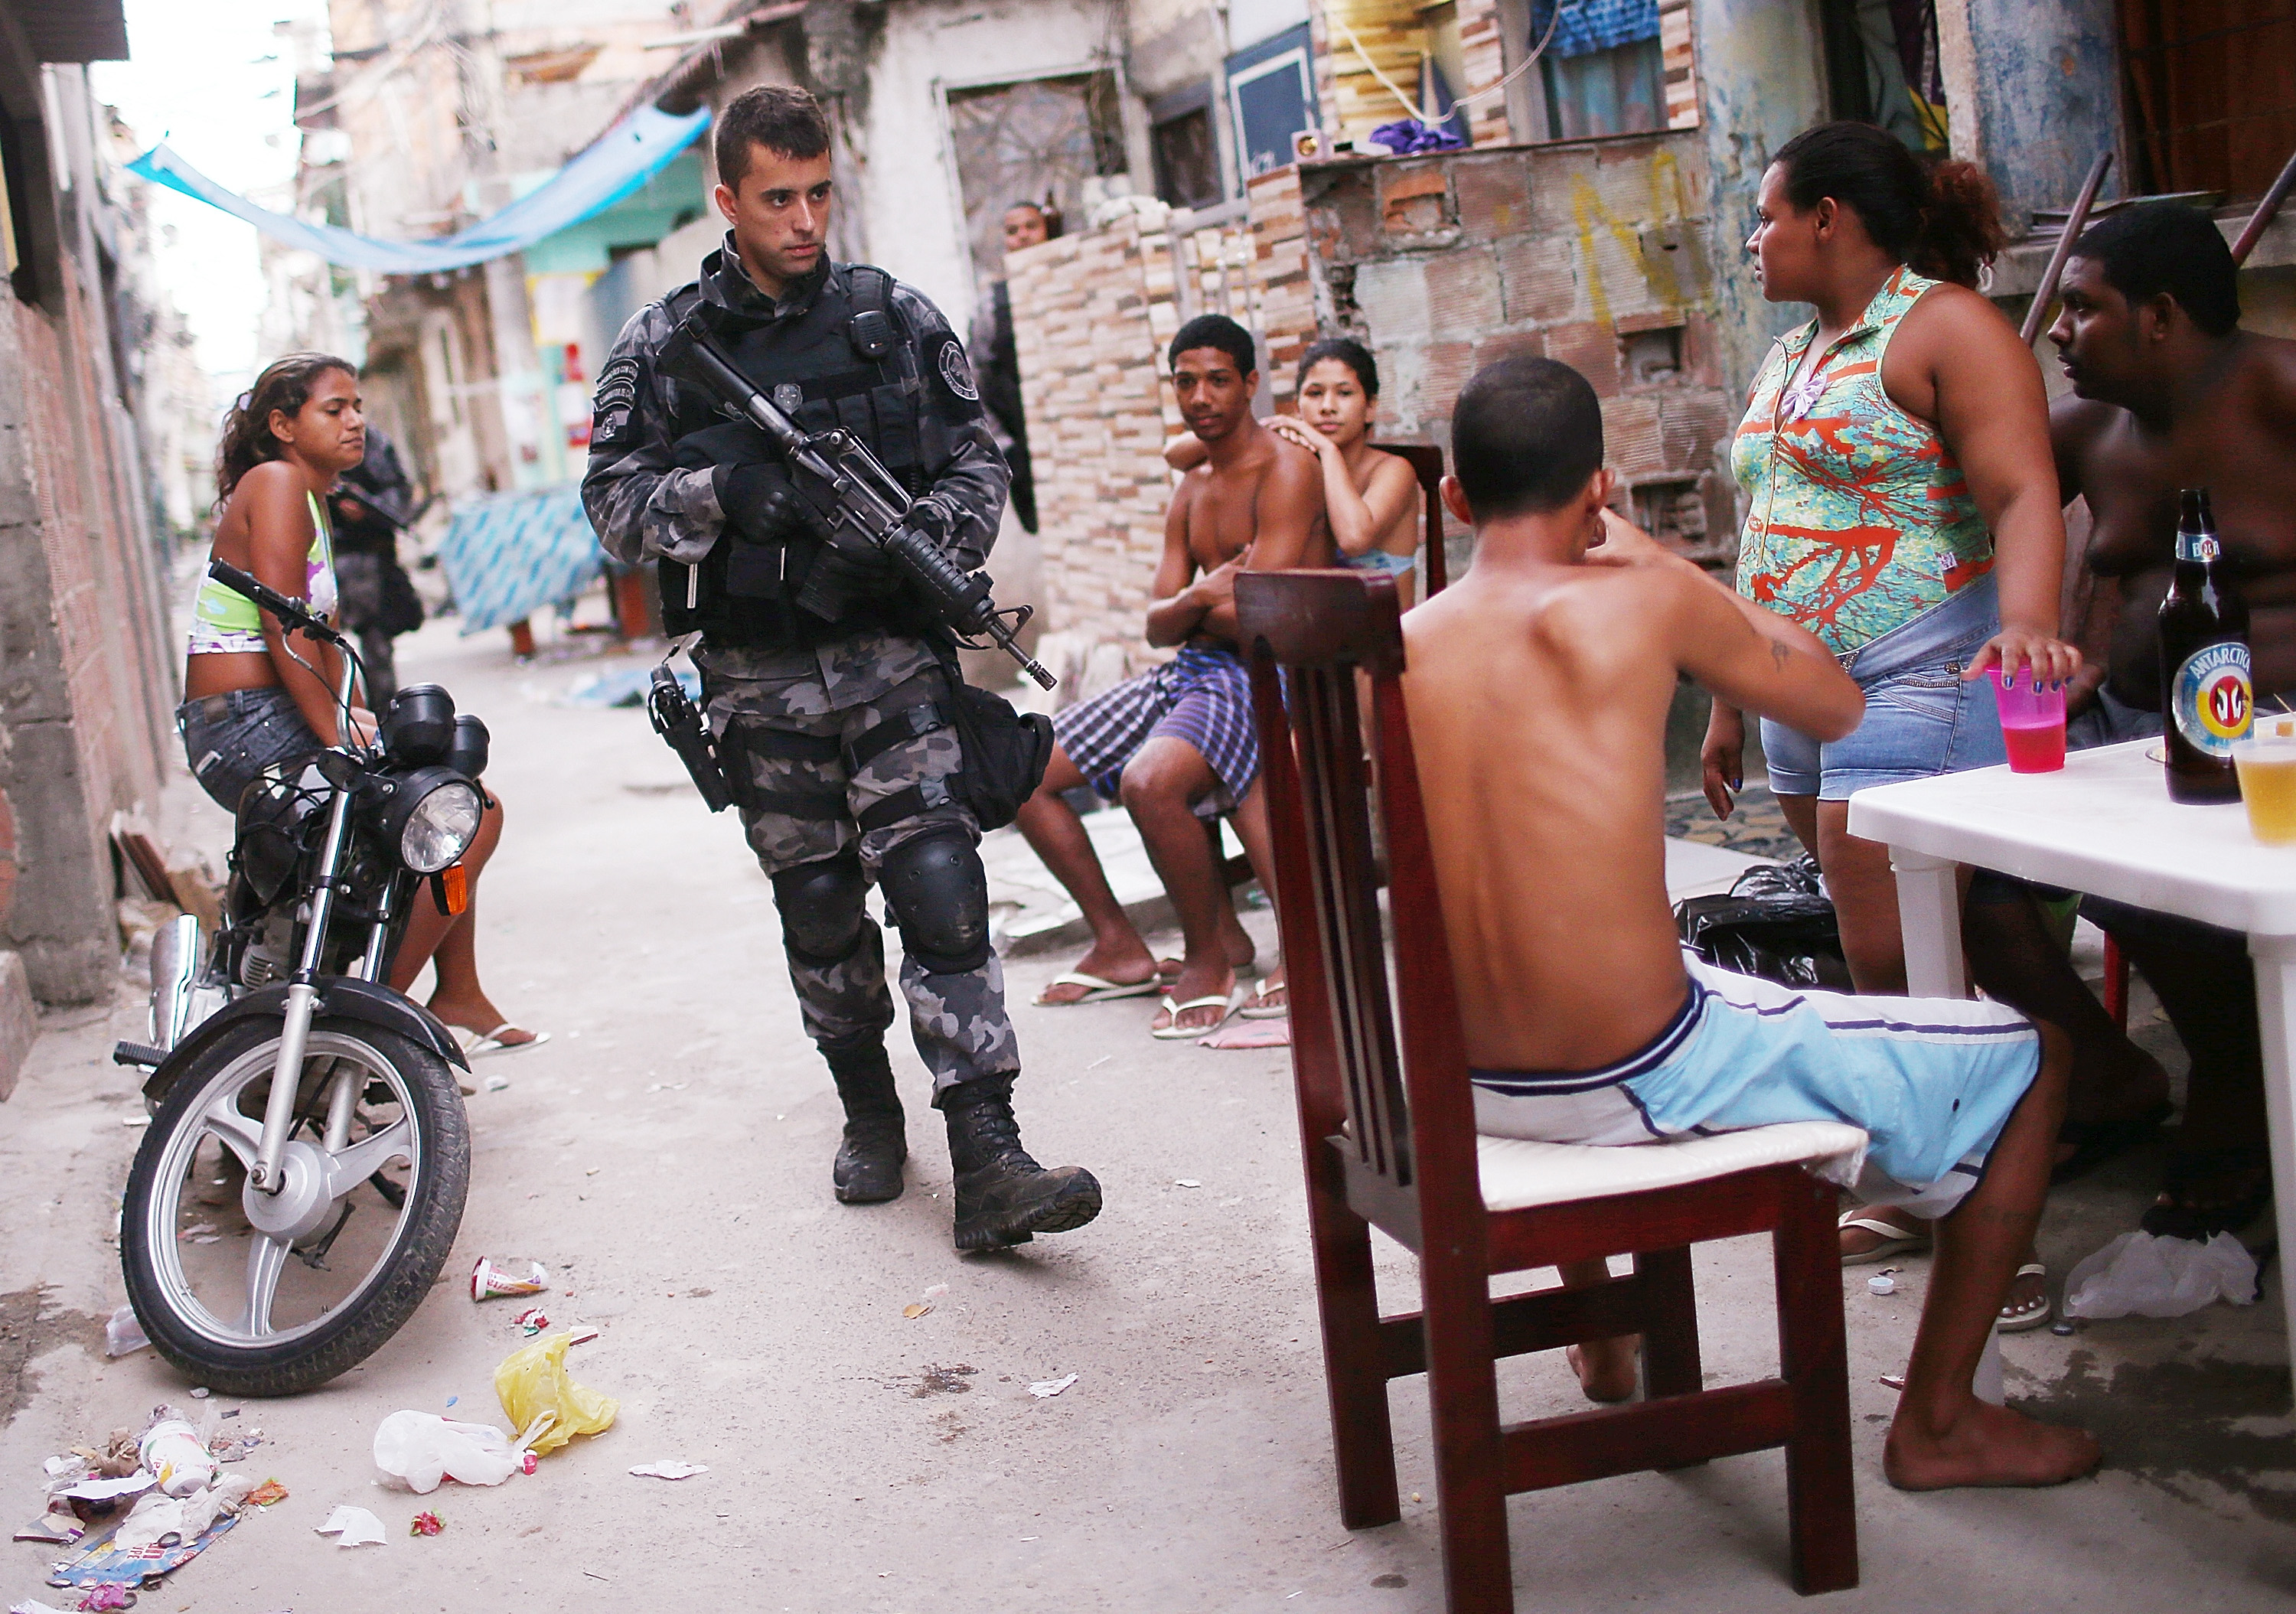 A Brazilian military police officer patrols after entering the unpacified Complexo da Mare, one of the largest 'favela' complexes in Rio, on March 30, 2014 in Rio de Janeiro, Brazil. 